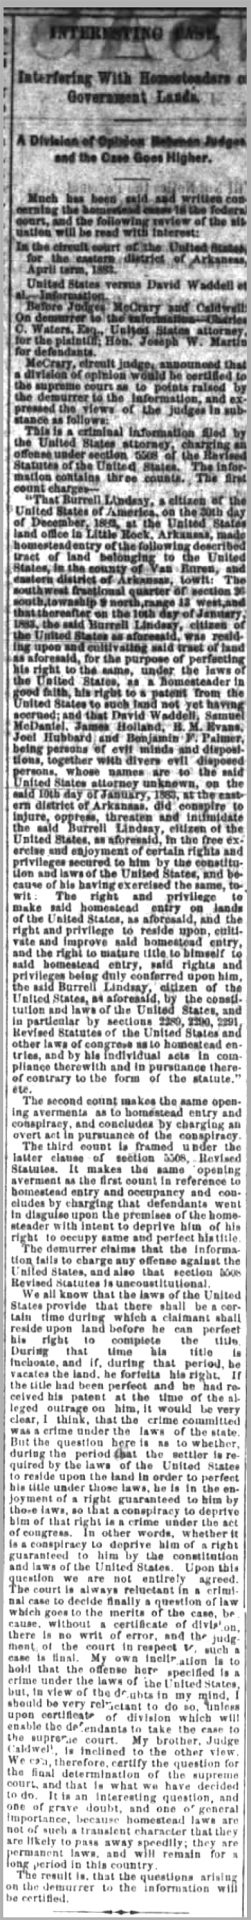 "Interfering with homesteaders on government land" newspaper clipping